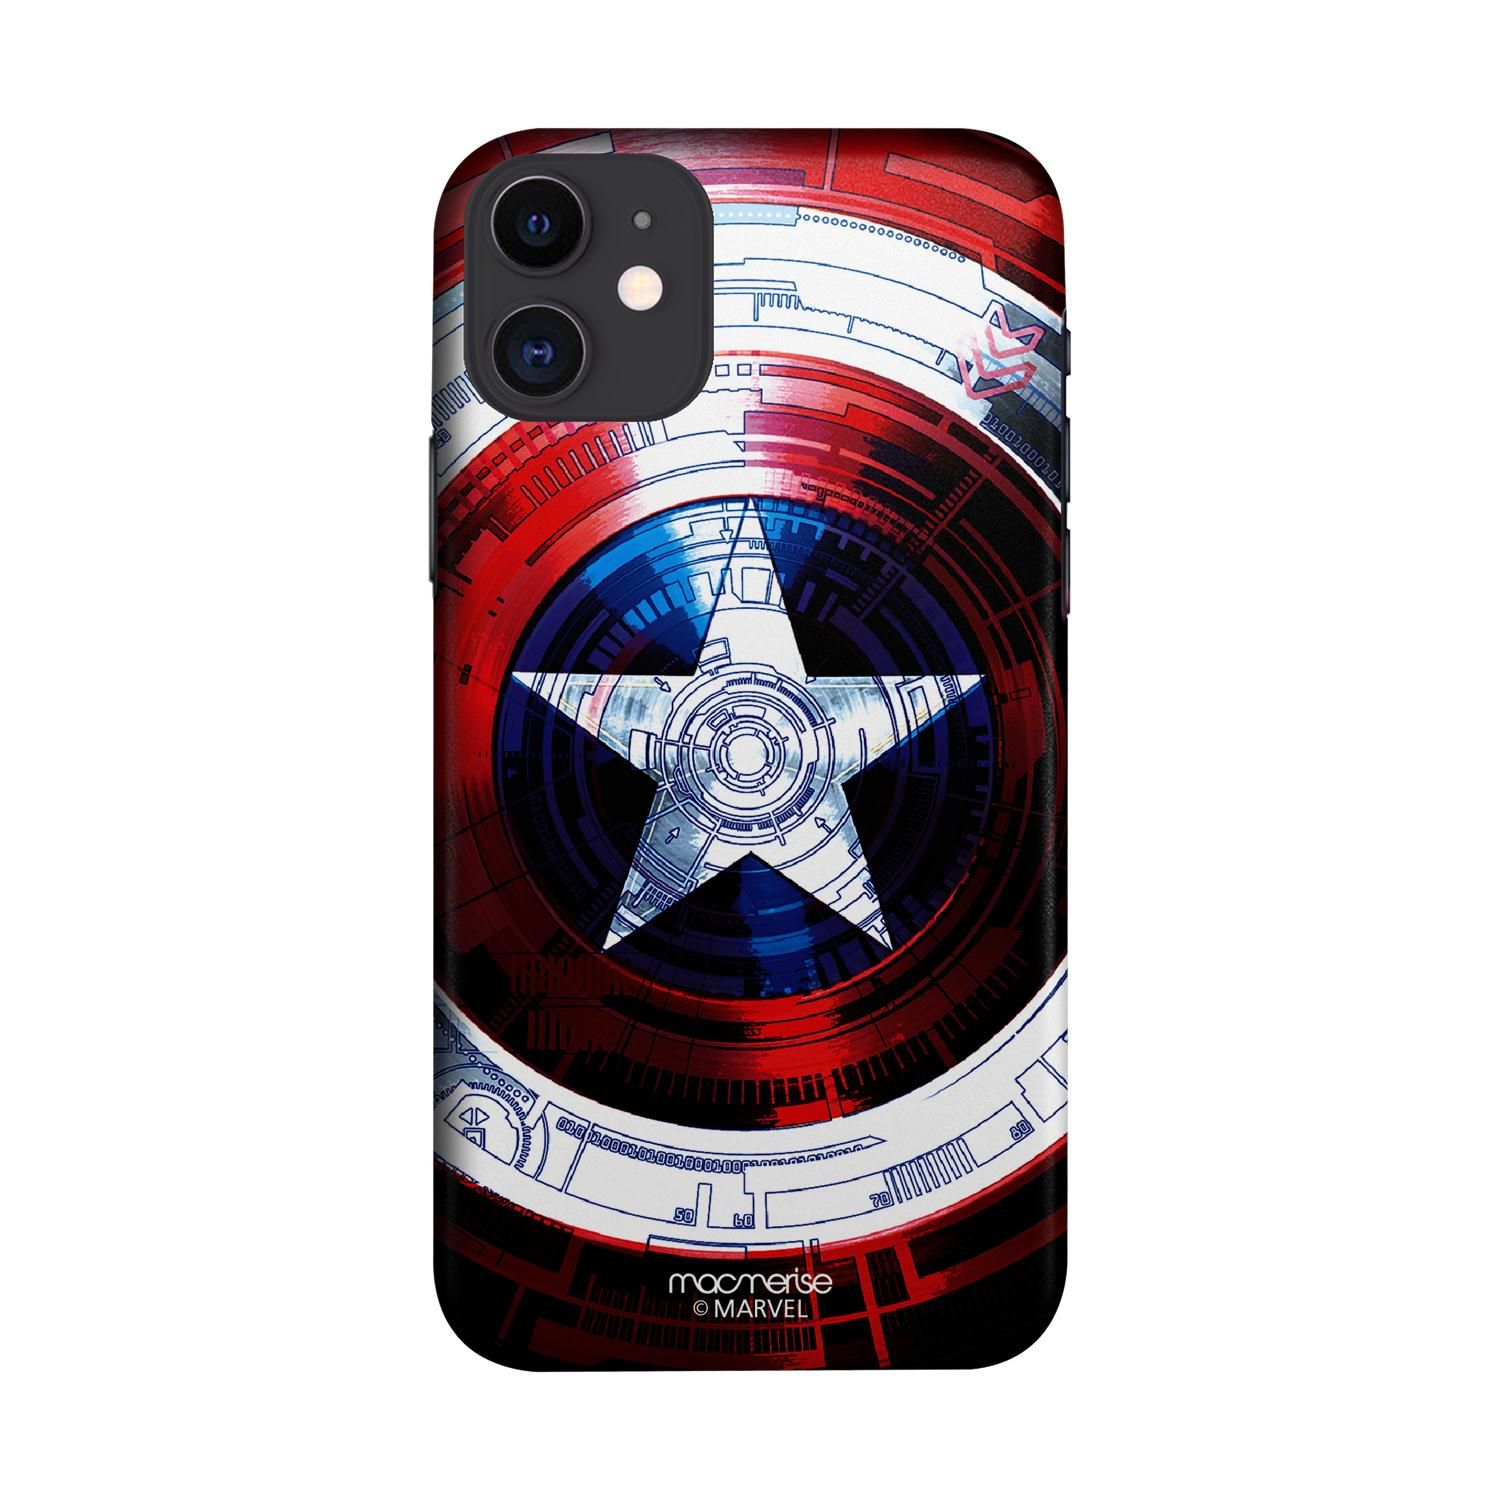 Buy Captains Shield Decoded - Sleek Phone Case for iPhone 11 Online